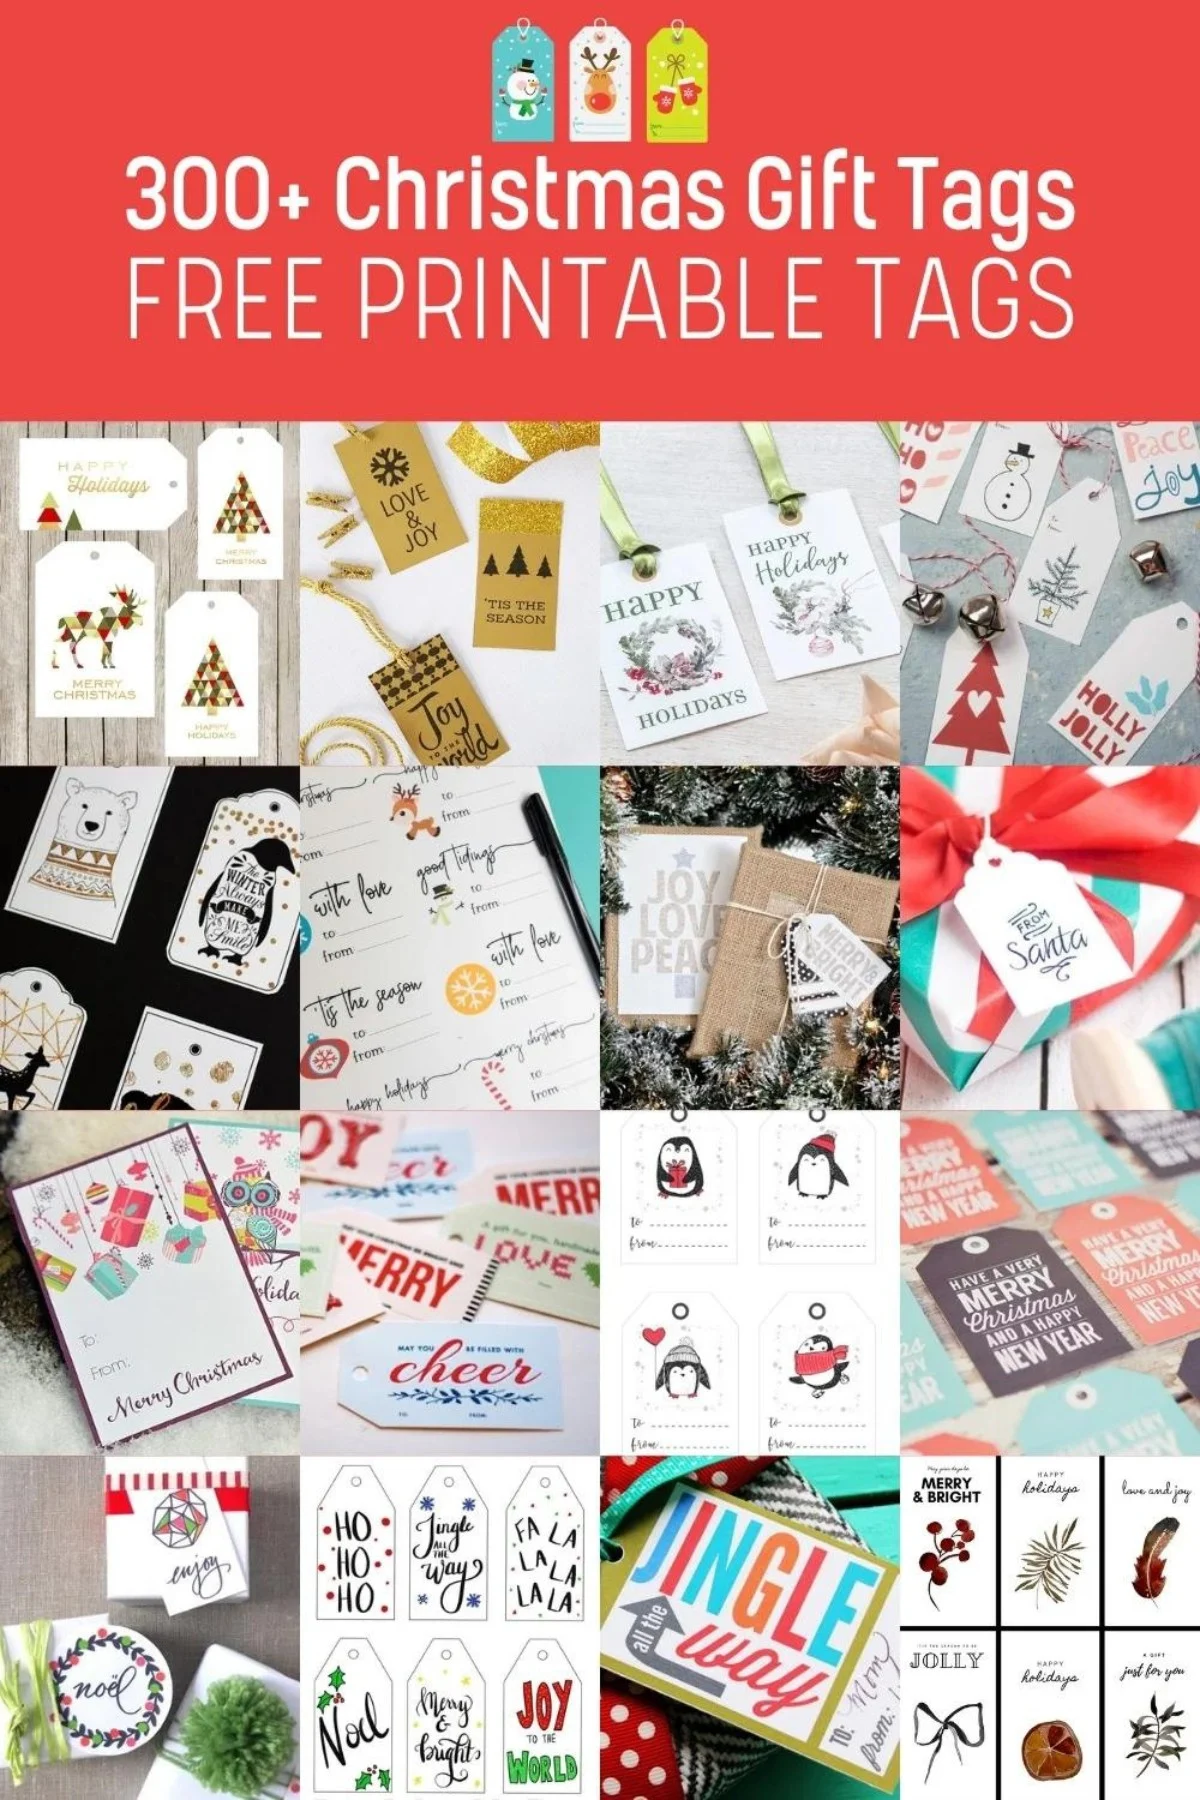 Free Gift Tag Maker Online - Create Gift Tag Designs